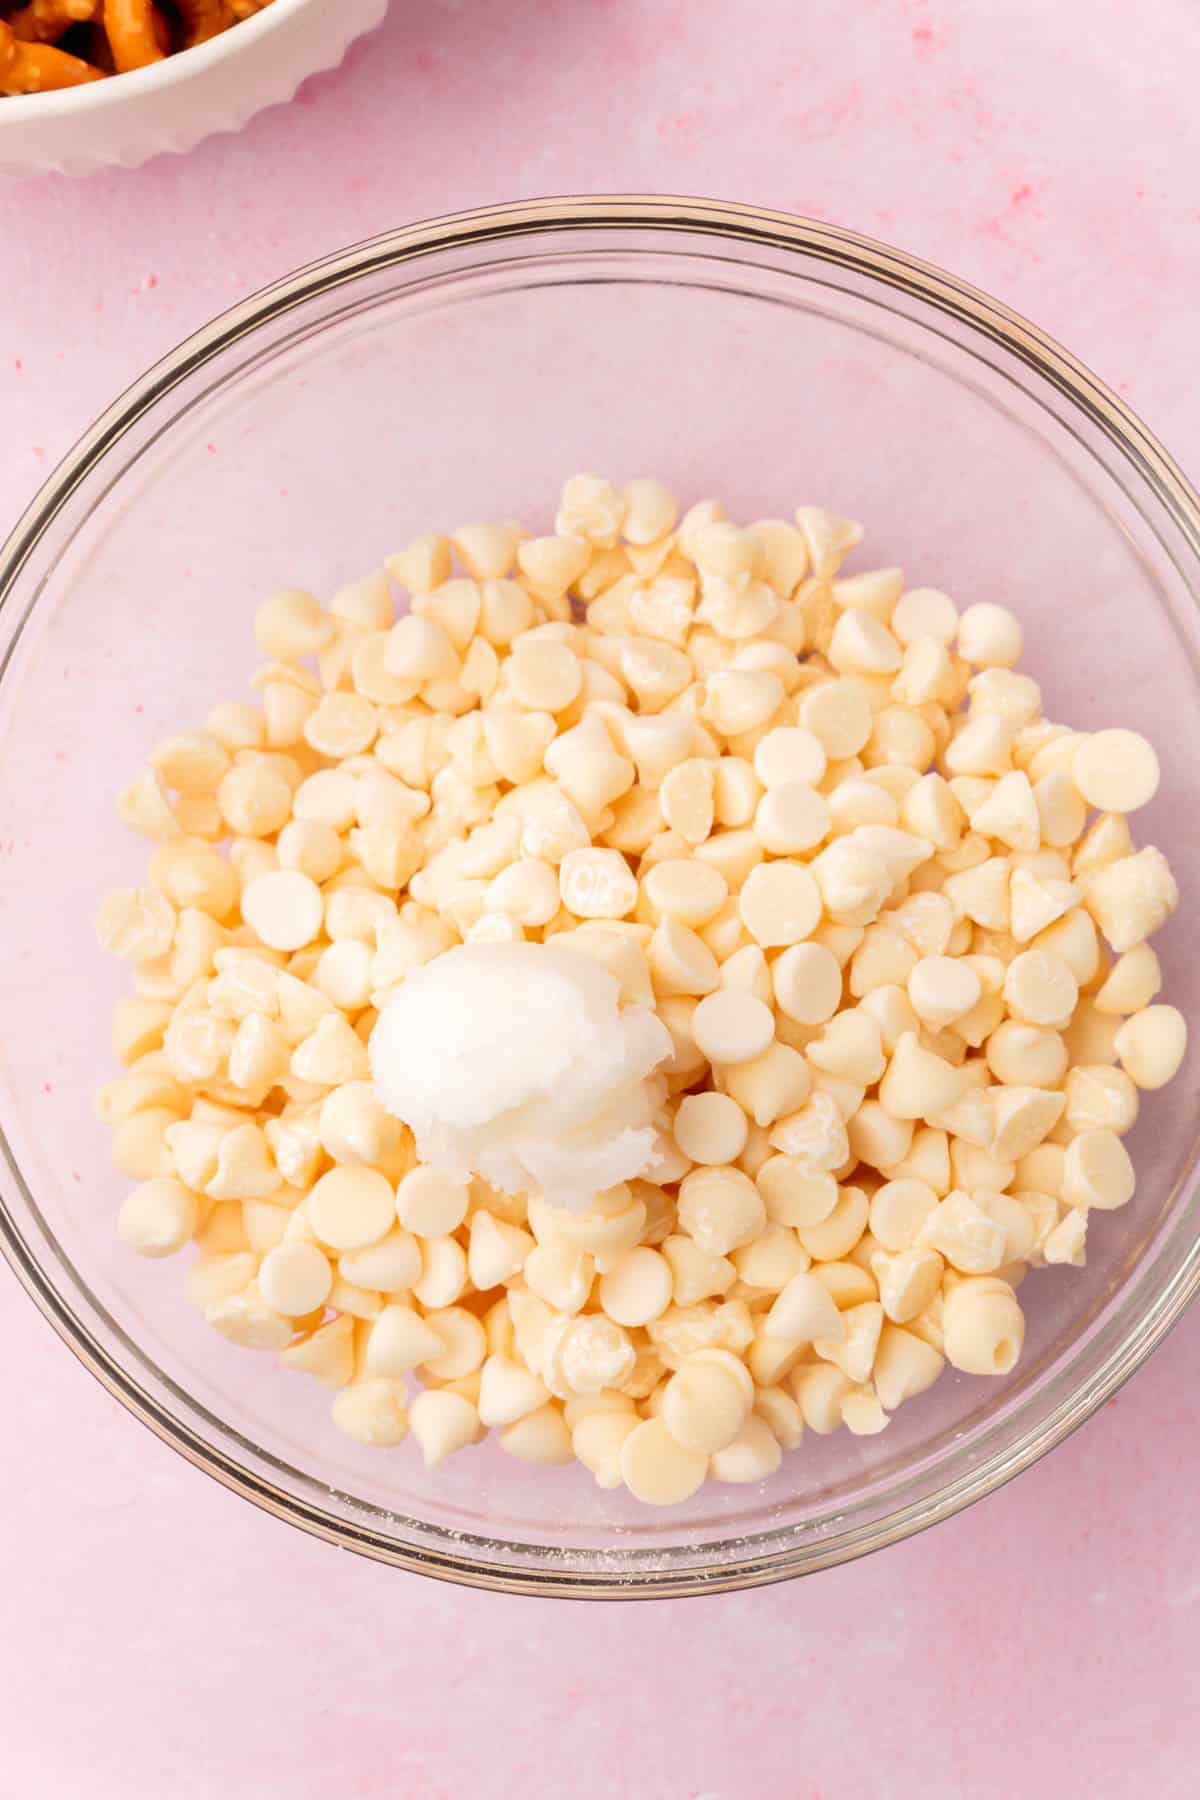 A glass bowl of white chocolate chips with coconut oil before melting.